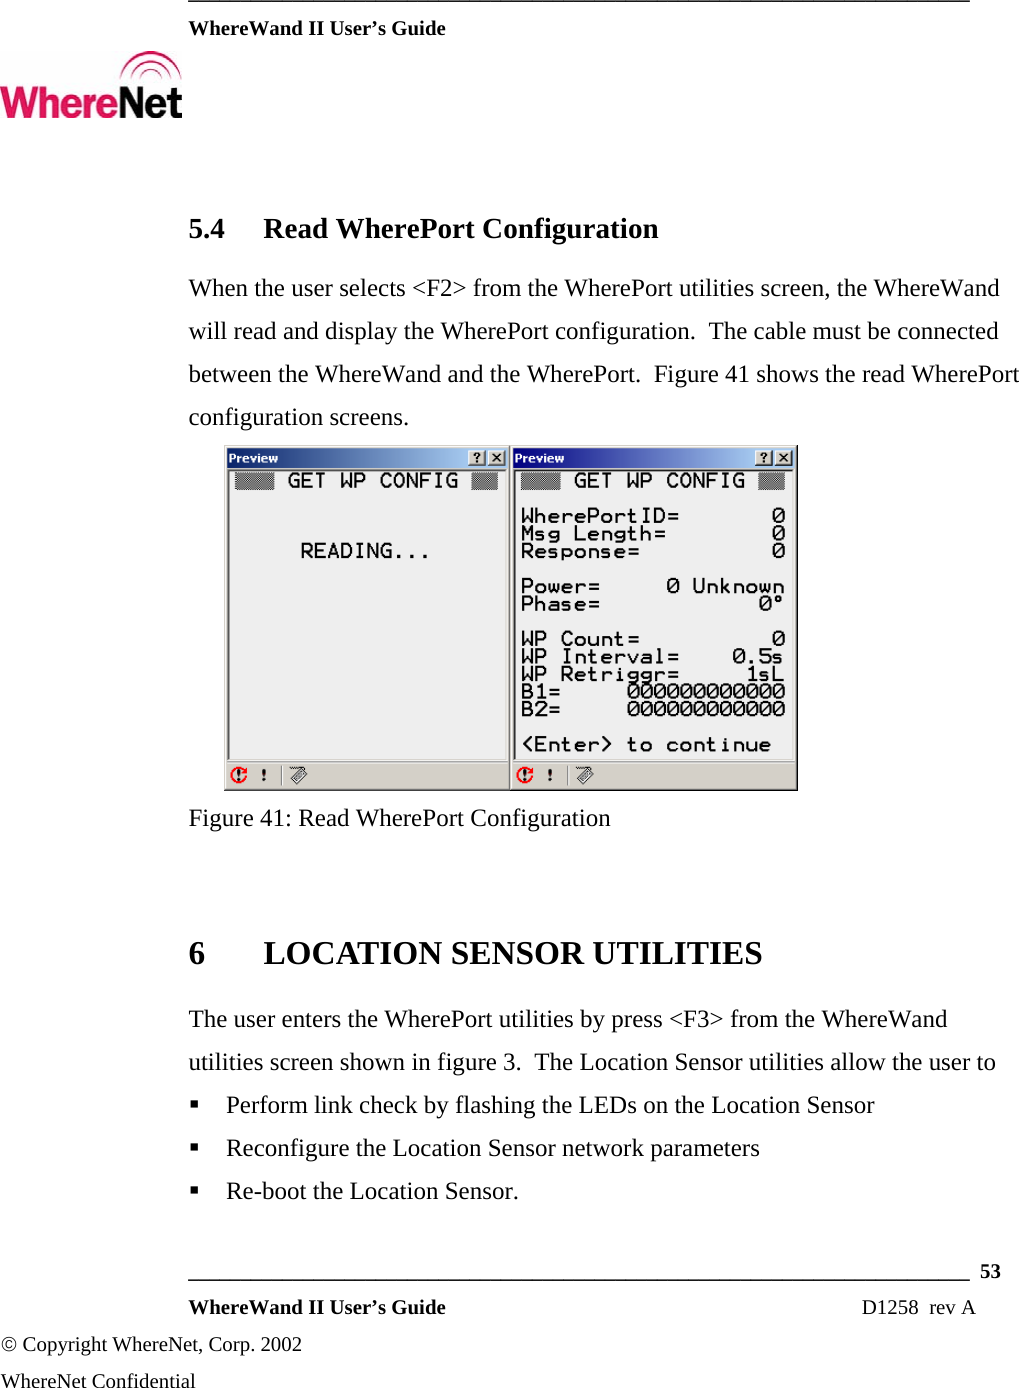  ___________________________________________________________________________  WhereWand II User’s Guide     ___________________________________________________________________________  53  WhereWand II User’s Guide                                                                          D1258  rev A © Copyright WhereNet, Corp. 2002  WhereNet Confidential 5.4 Read WherePort Configuration When the user selects &lt;F2&gt; from the WherePort utilities screen, the WhereWand will read and display the WherePort configuration.  The cable must be connected between the WhereWand and the WherePort.  Figure 41 shows the read WherePort configuration screens.  Figure 41: Read WherePort Configuration  6 LOCATION SENSOR UTILITIES The user enters the WherePort utilities by press &lt;F3&gt; from the WhereWand utilities screen shown in figure 3.  The Location Sensor utilities allow the user to   Perform link check by flashing the LEDs on the Location Sensor  Reconfigure the Location Sensor network parameters  Re-boot the Location Sensor. 